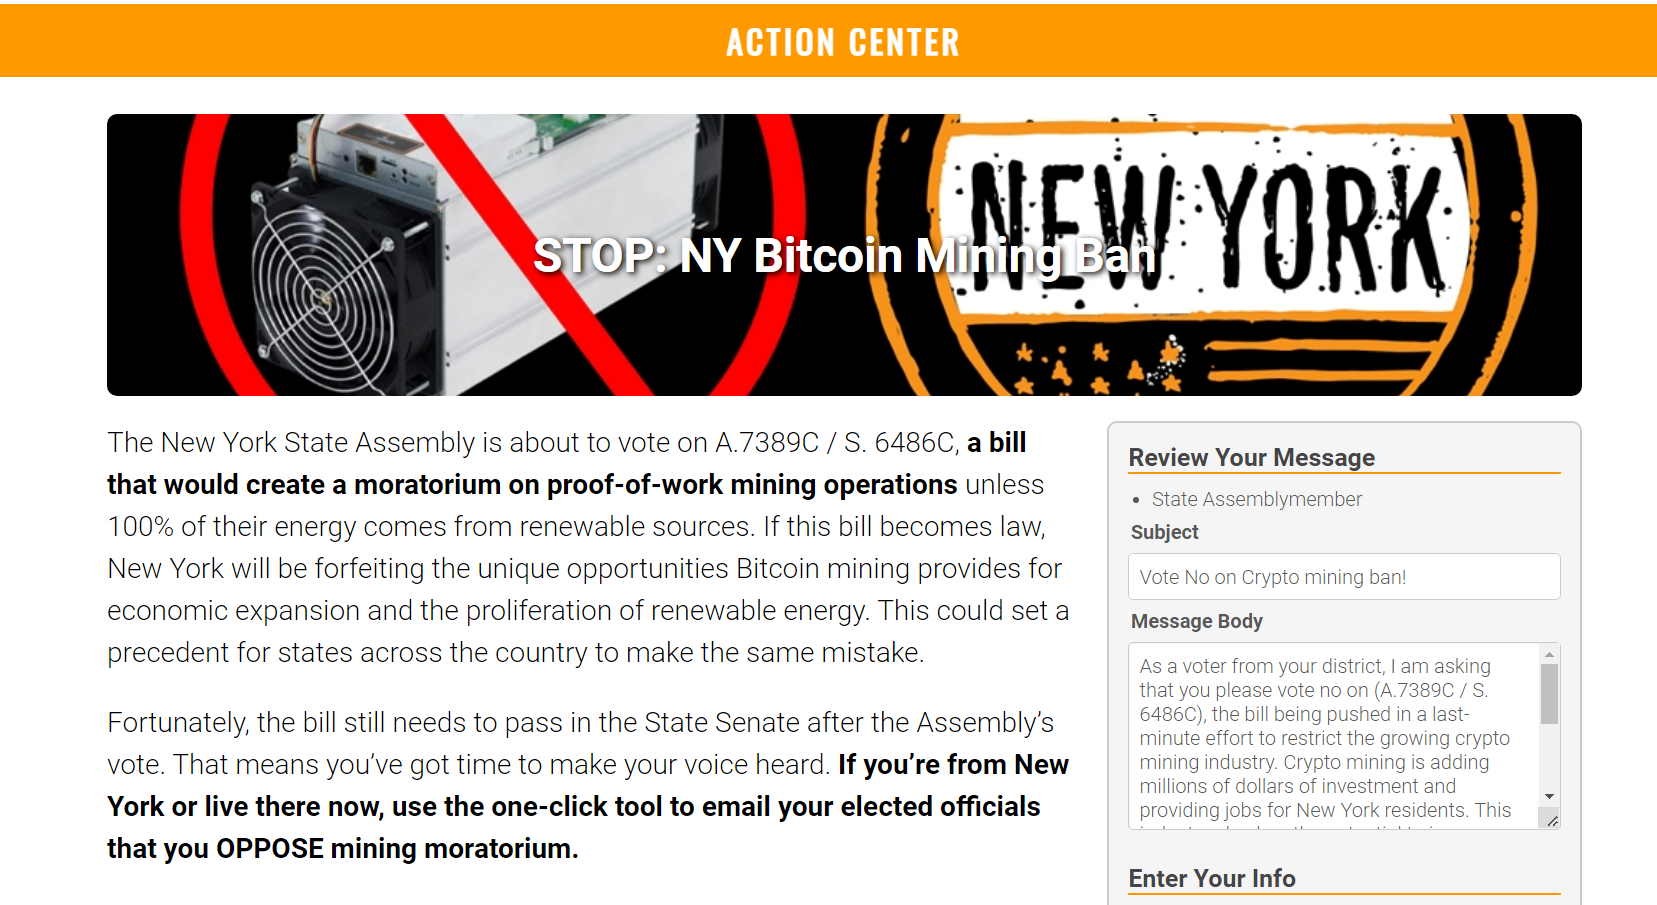 The New York Assembly is considering a ban on Bitcoin mining due to environmental concerns.